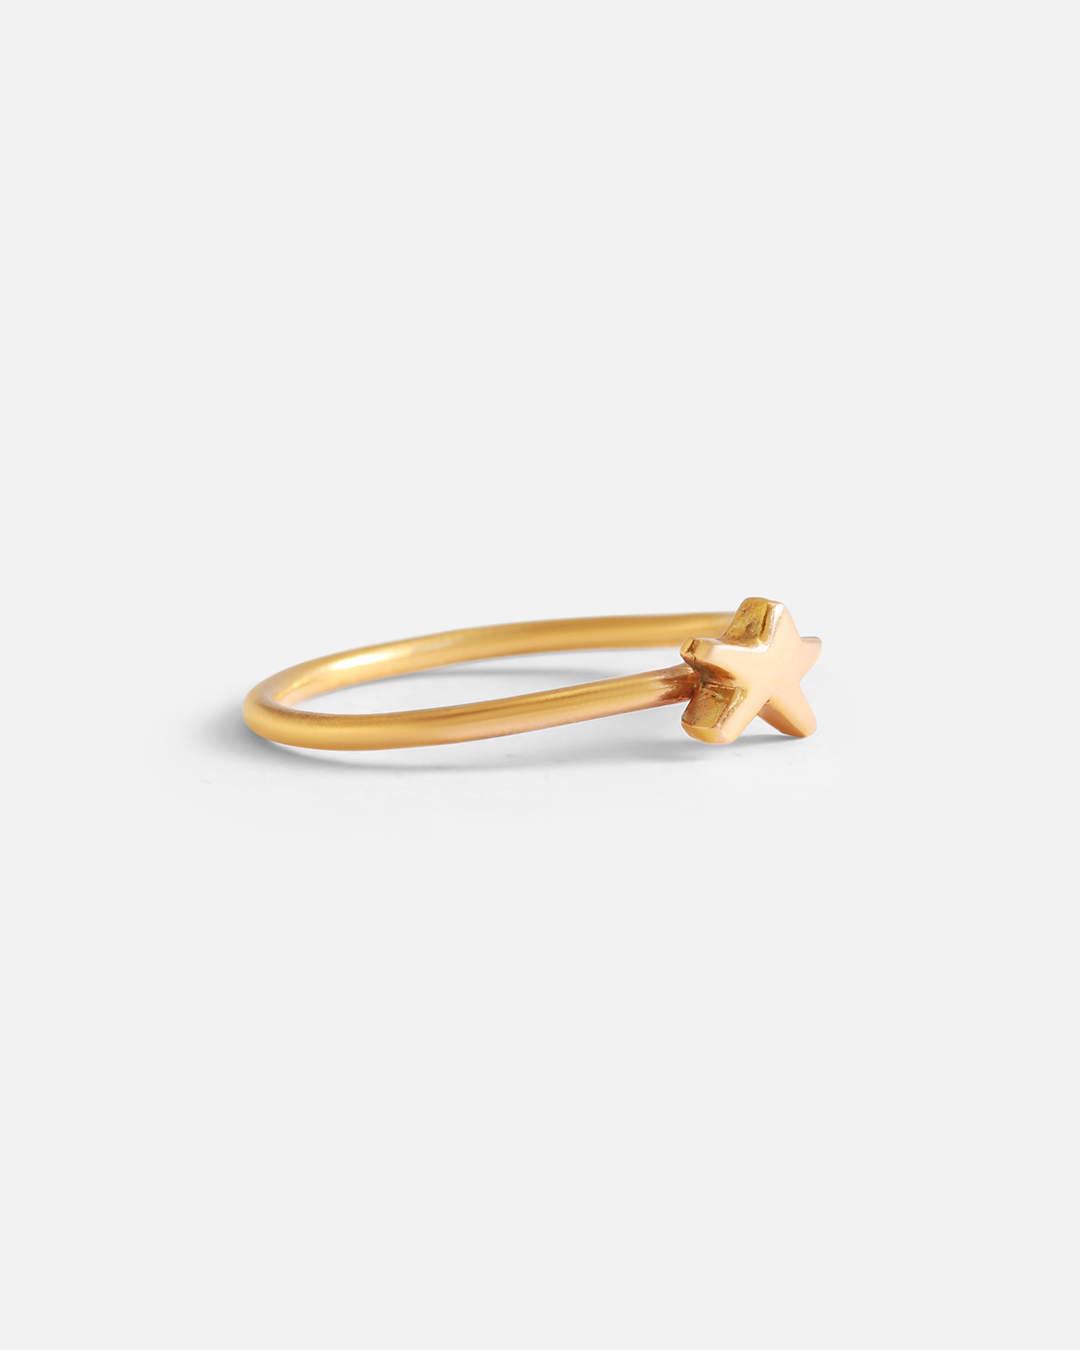 Sky / Stack Star Ring By fitzgerald jewelry